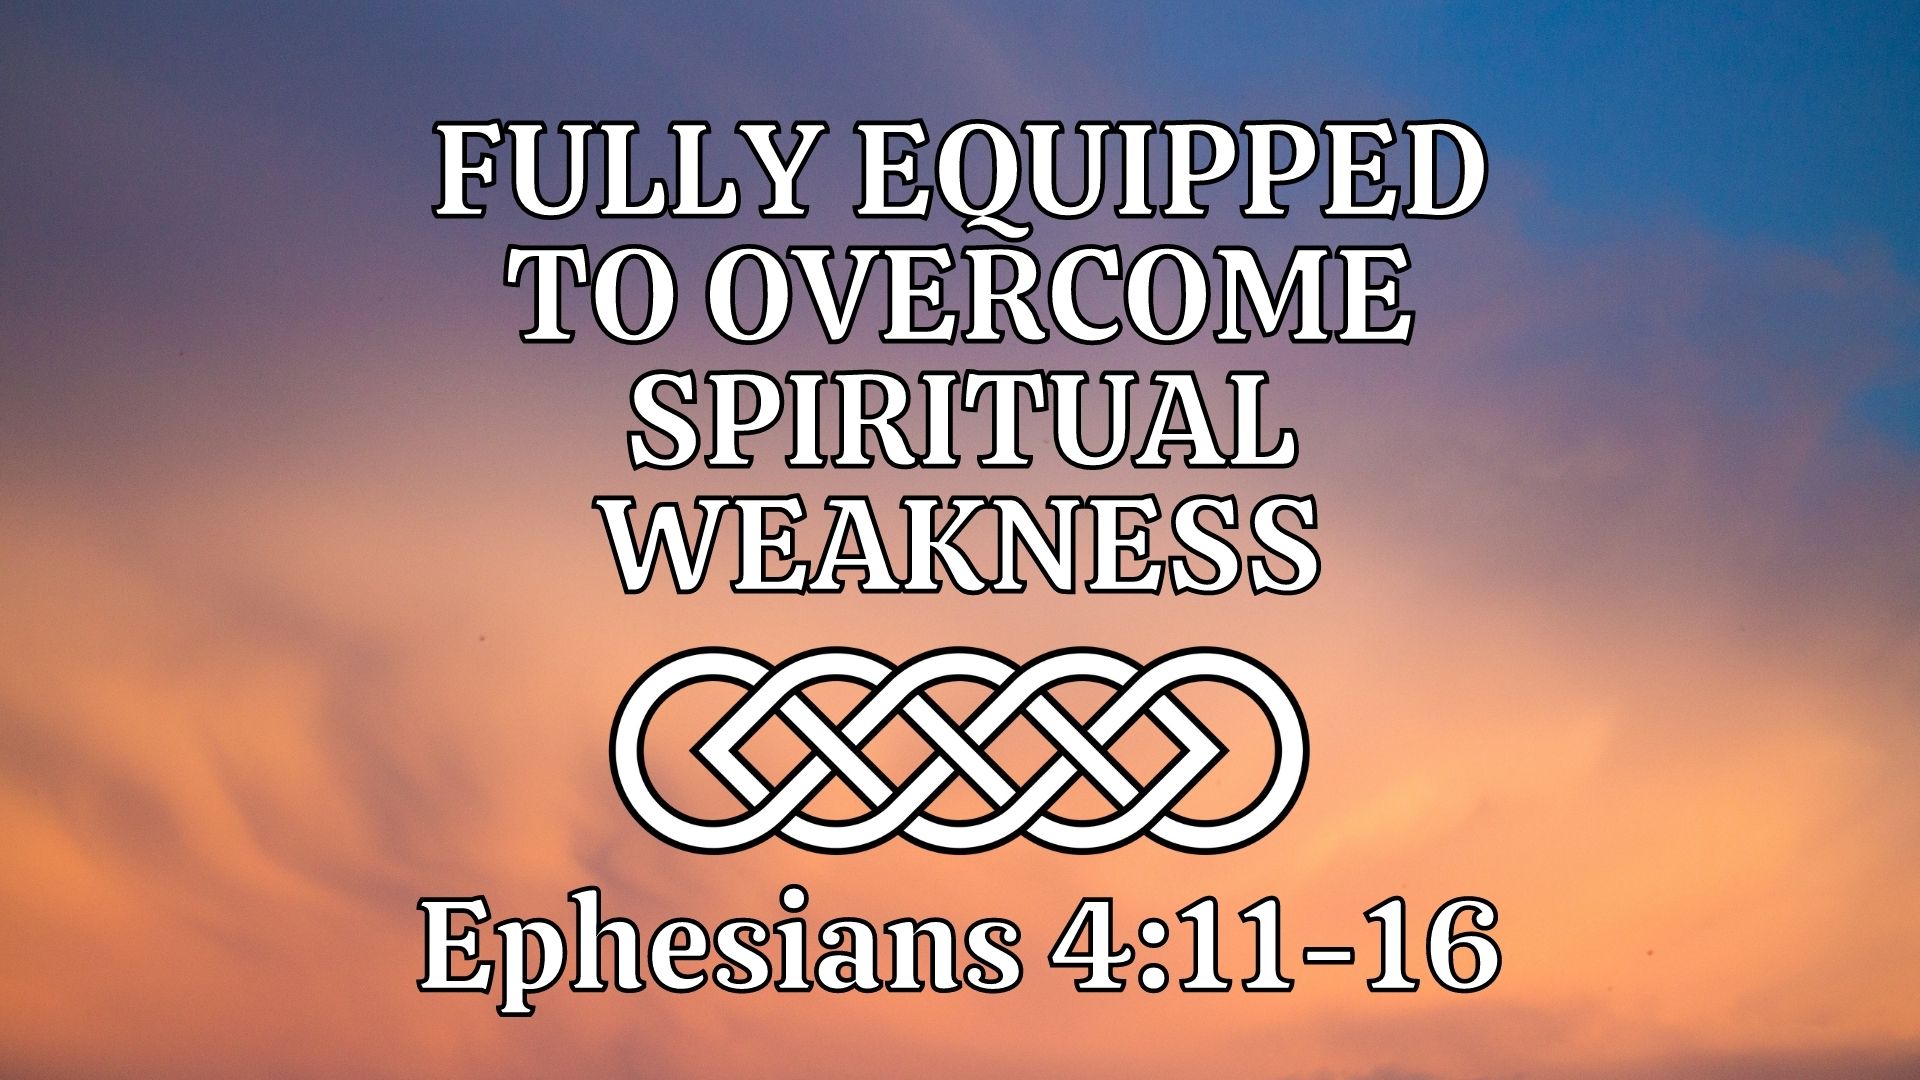 Fully Equipped to Overcome Spiritual Weakness (Ephesians 4:11-16) Image